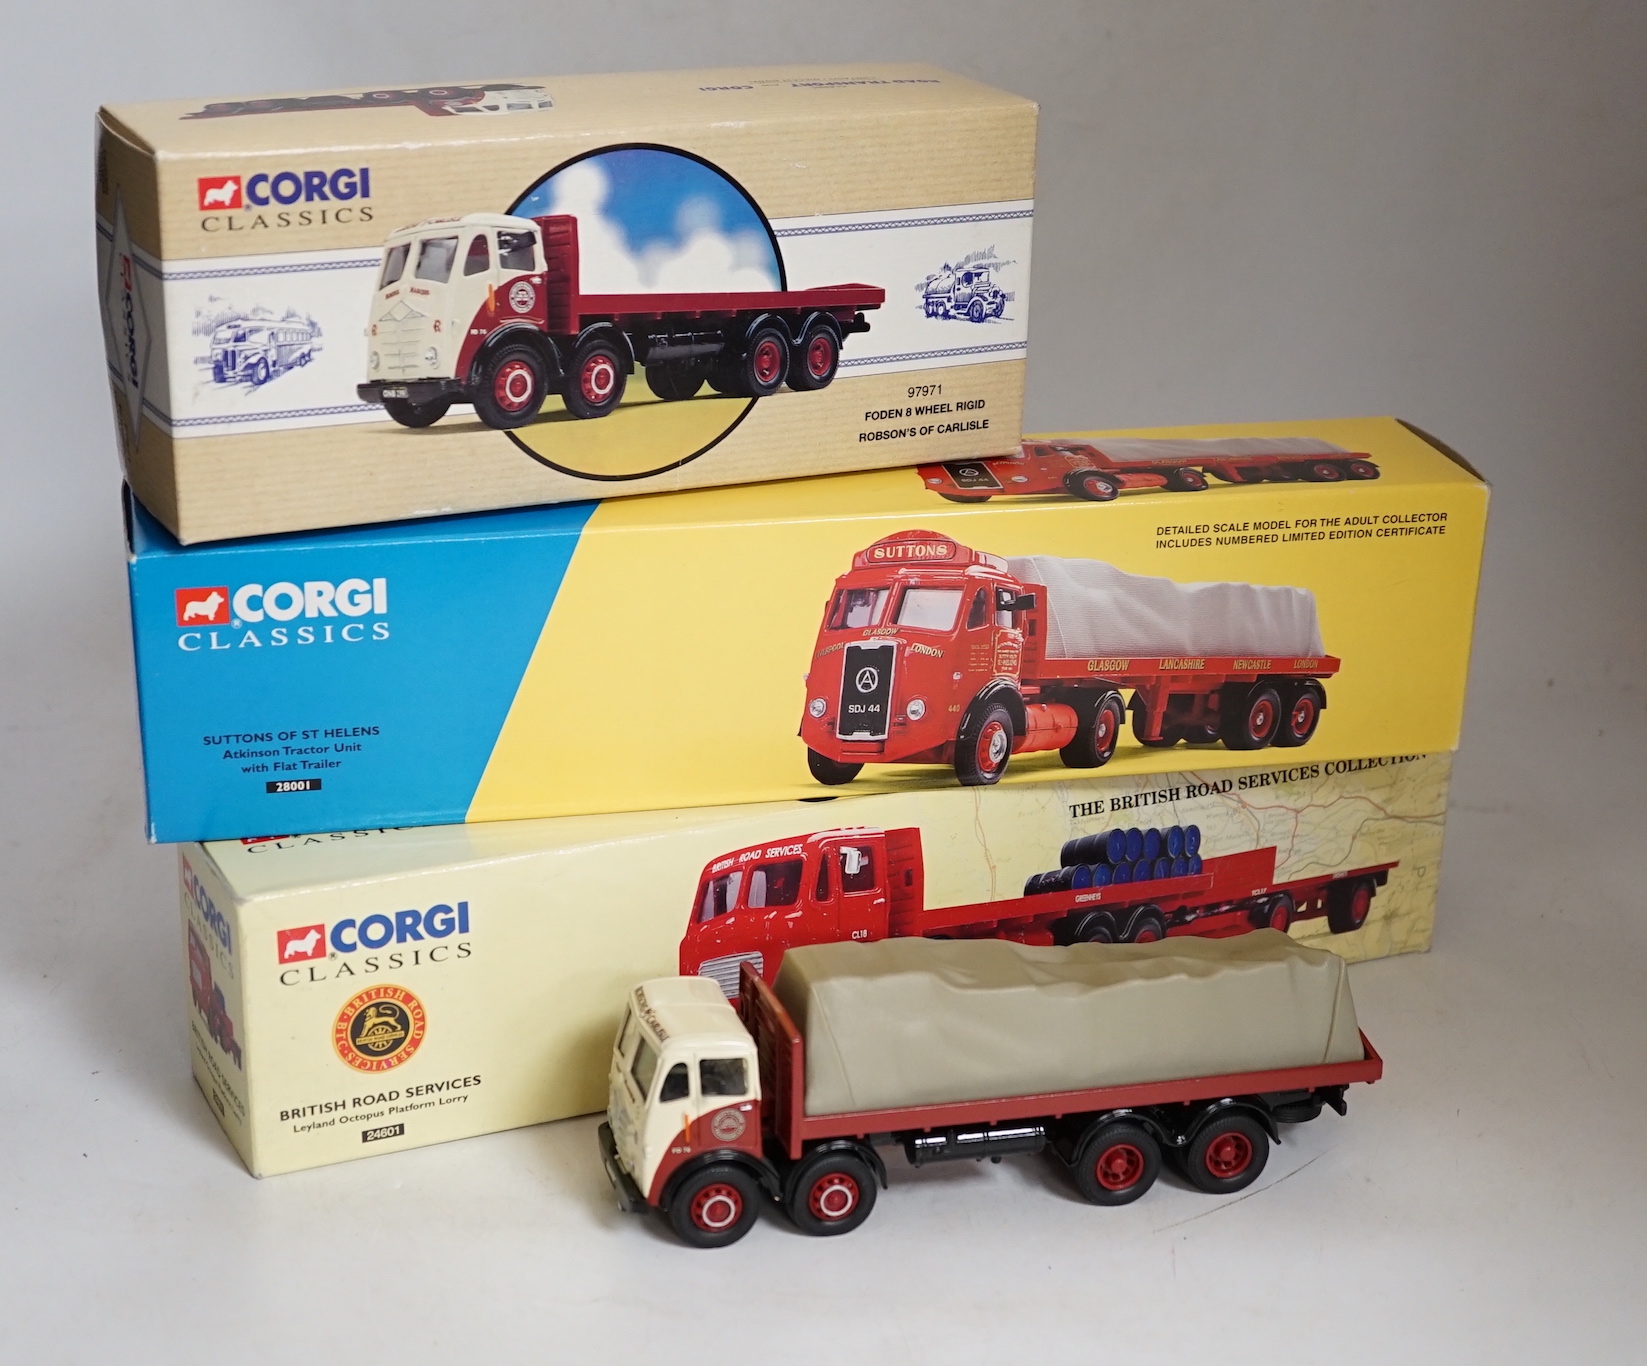 Eighteen boxed Corgi and Corgi Classics diecast commercial vehicles including tanker wagons, flatbed lorries, articulated box trailers, etc.